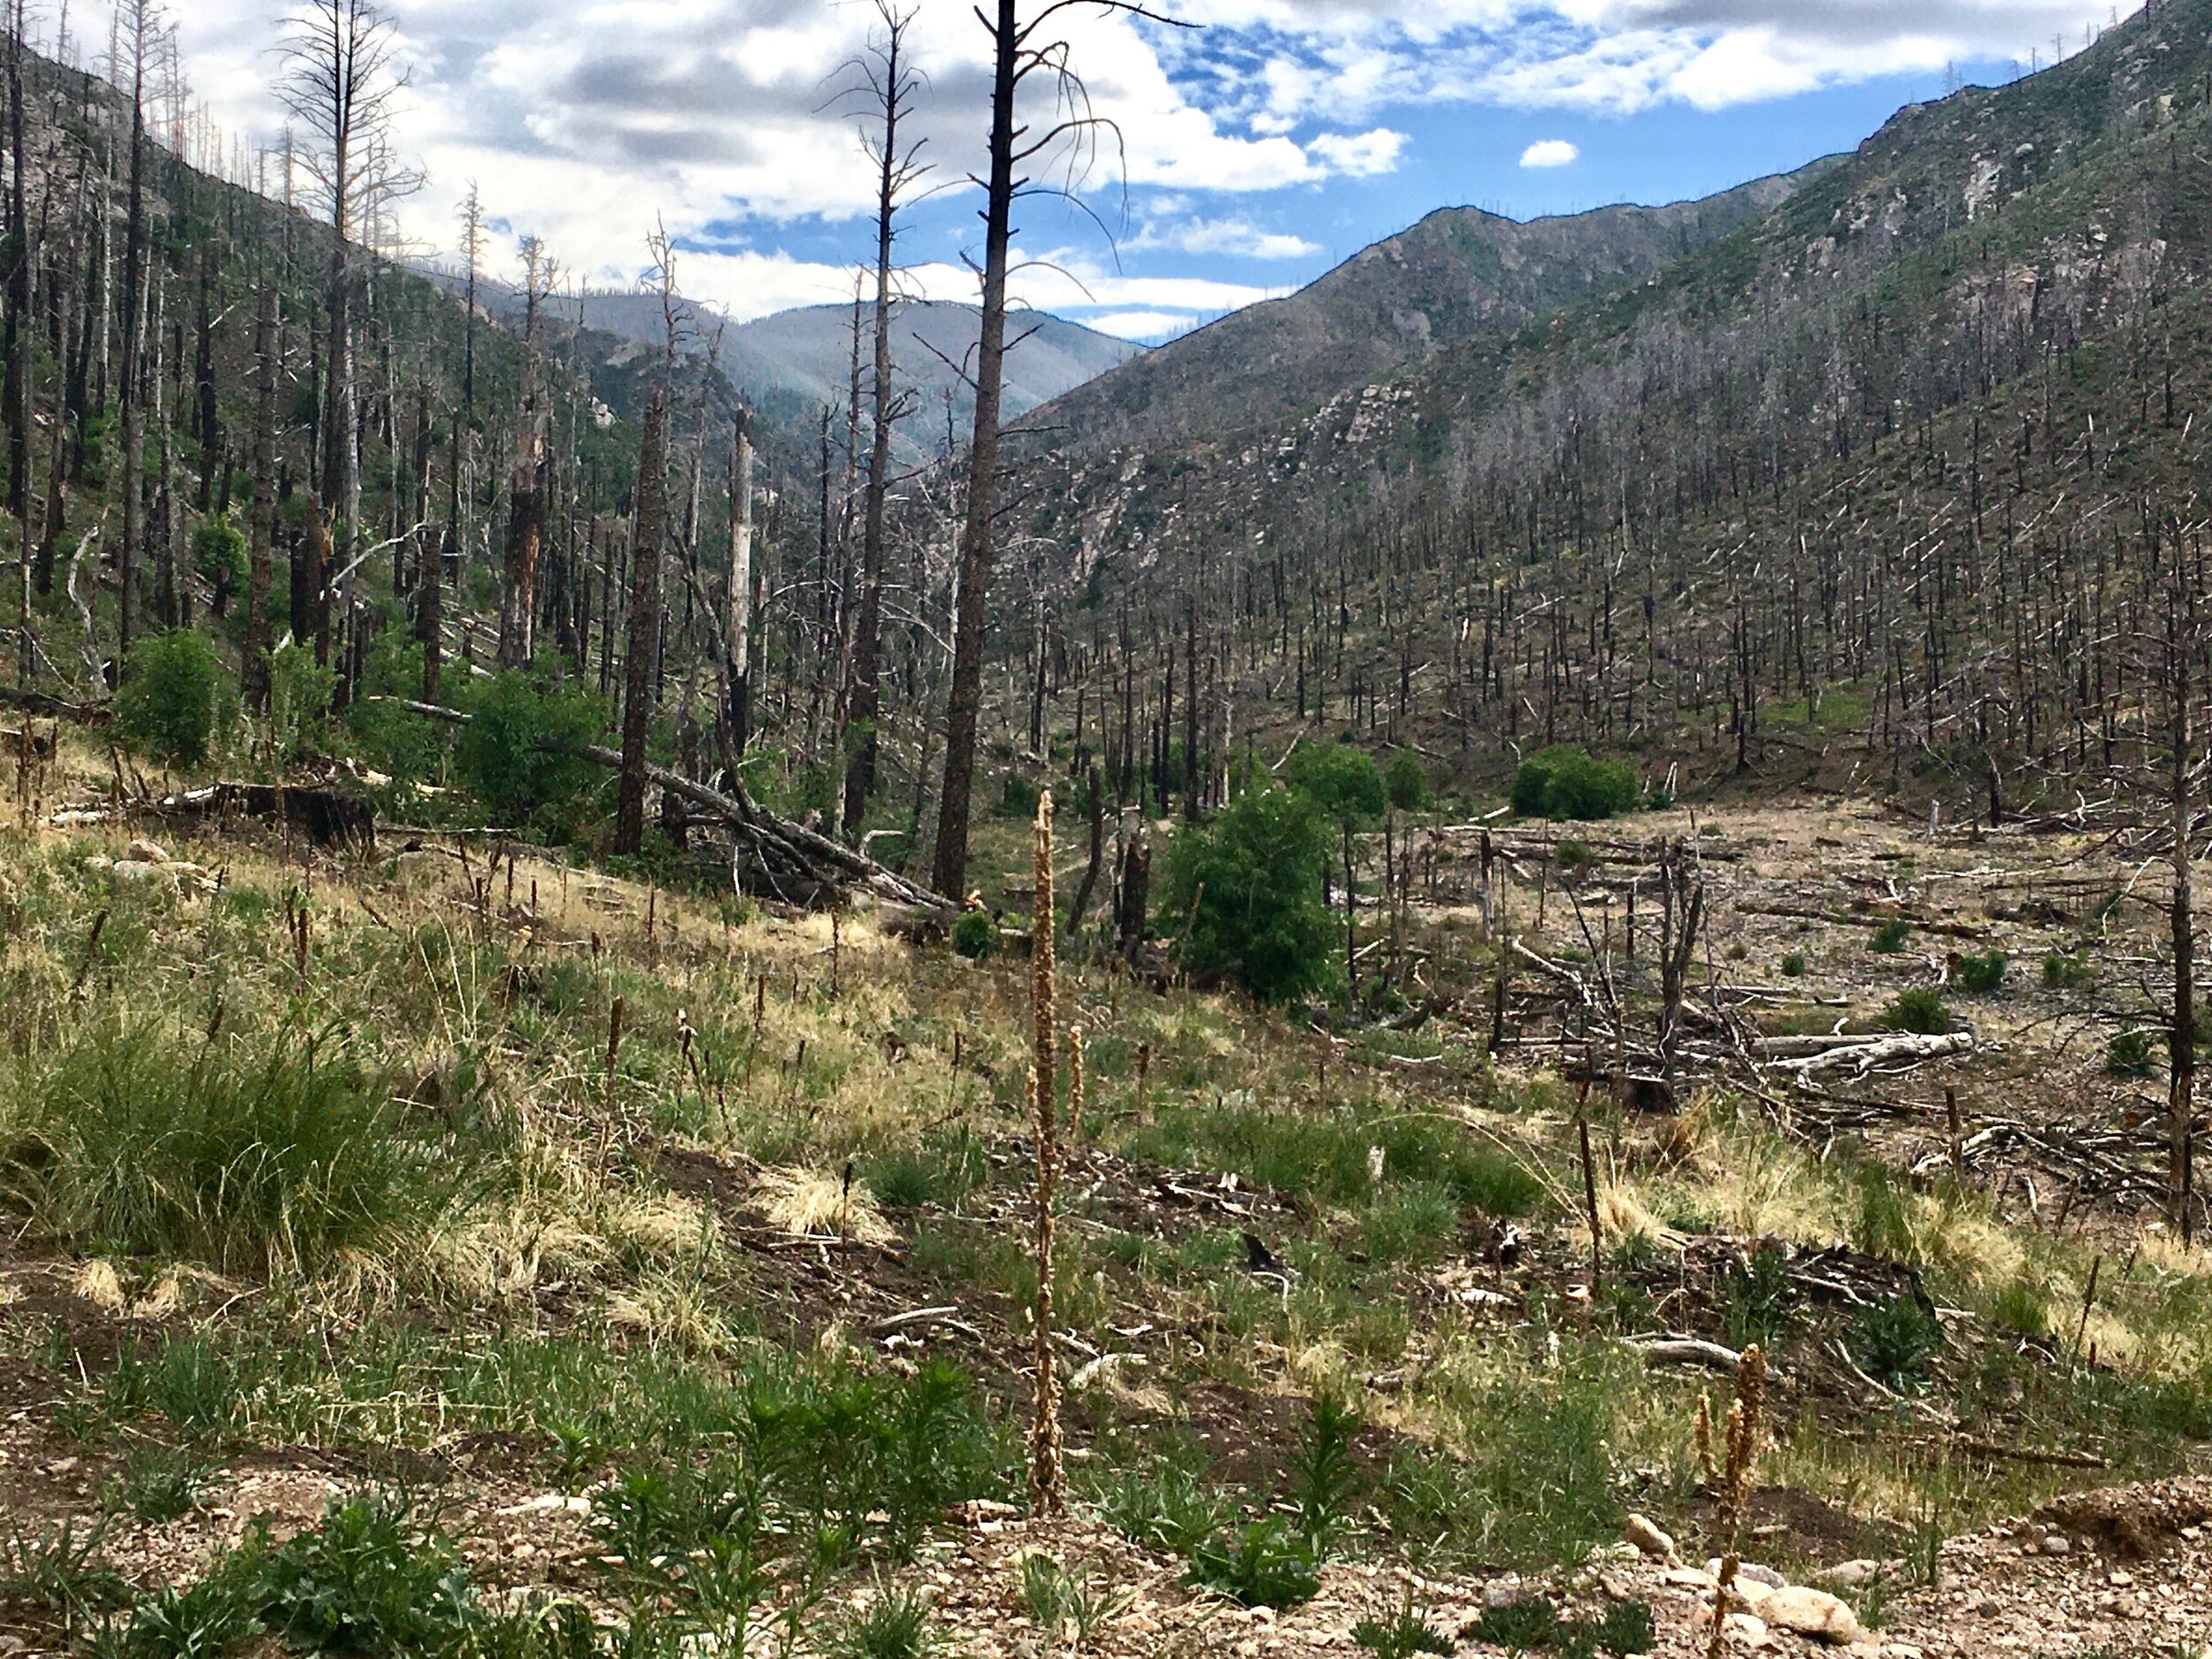  View from Southfork looking into the White Mountain Wilderness after the Little Bear Fire in 2012. The Little Bear Fire was started by lightning and burned over part of the Southfork Campground. 